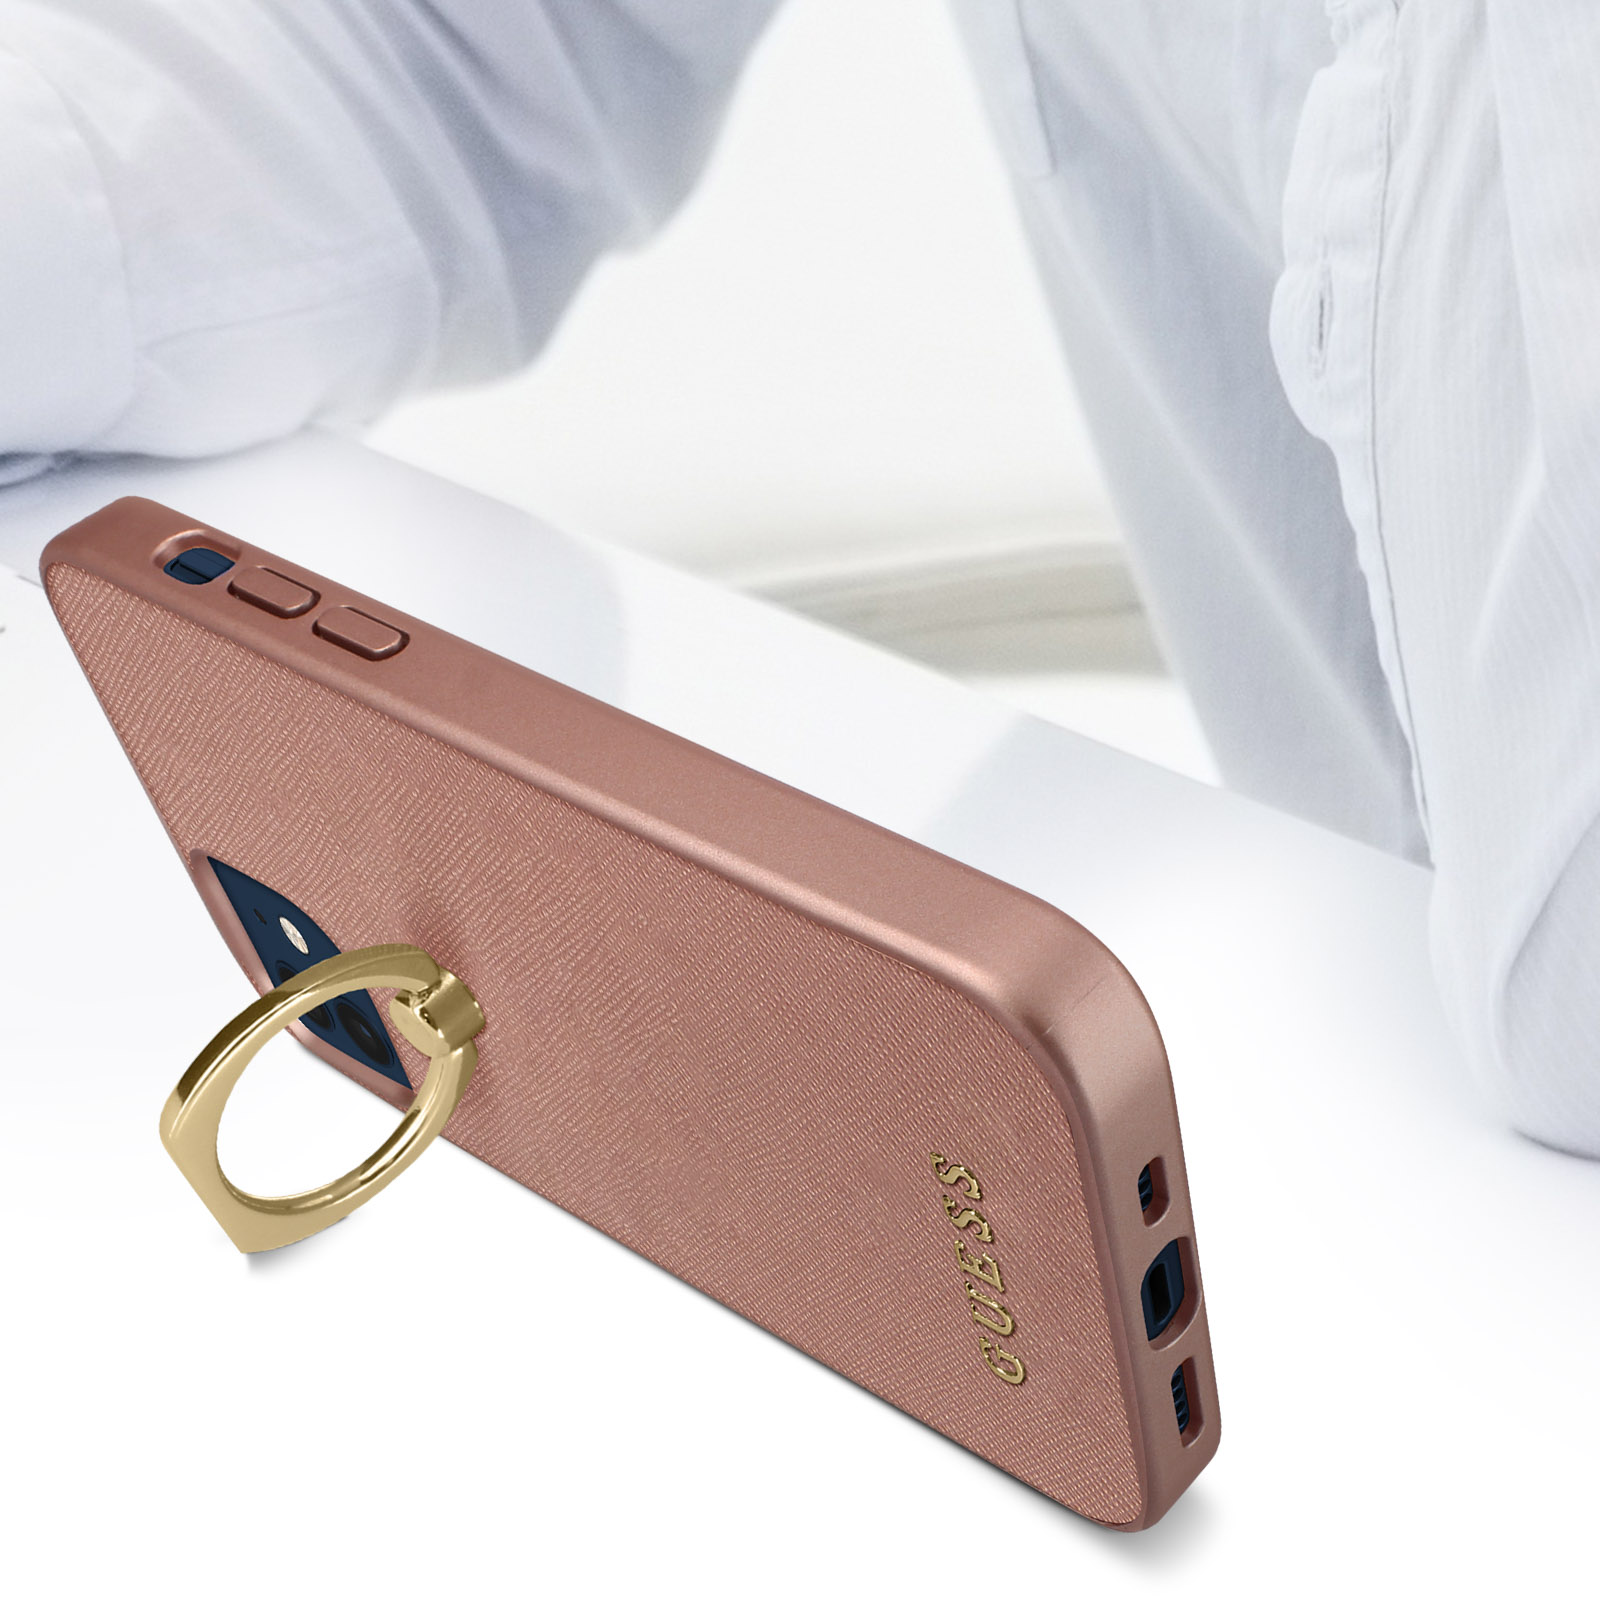 Series, 12 iPhone Backcover, Pro, GUESS Apple, Rosegold Lux